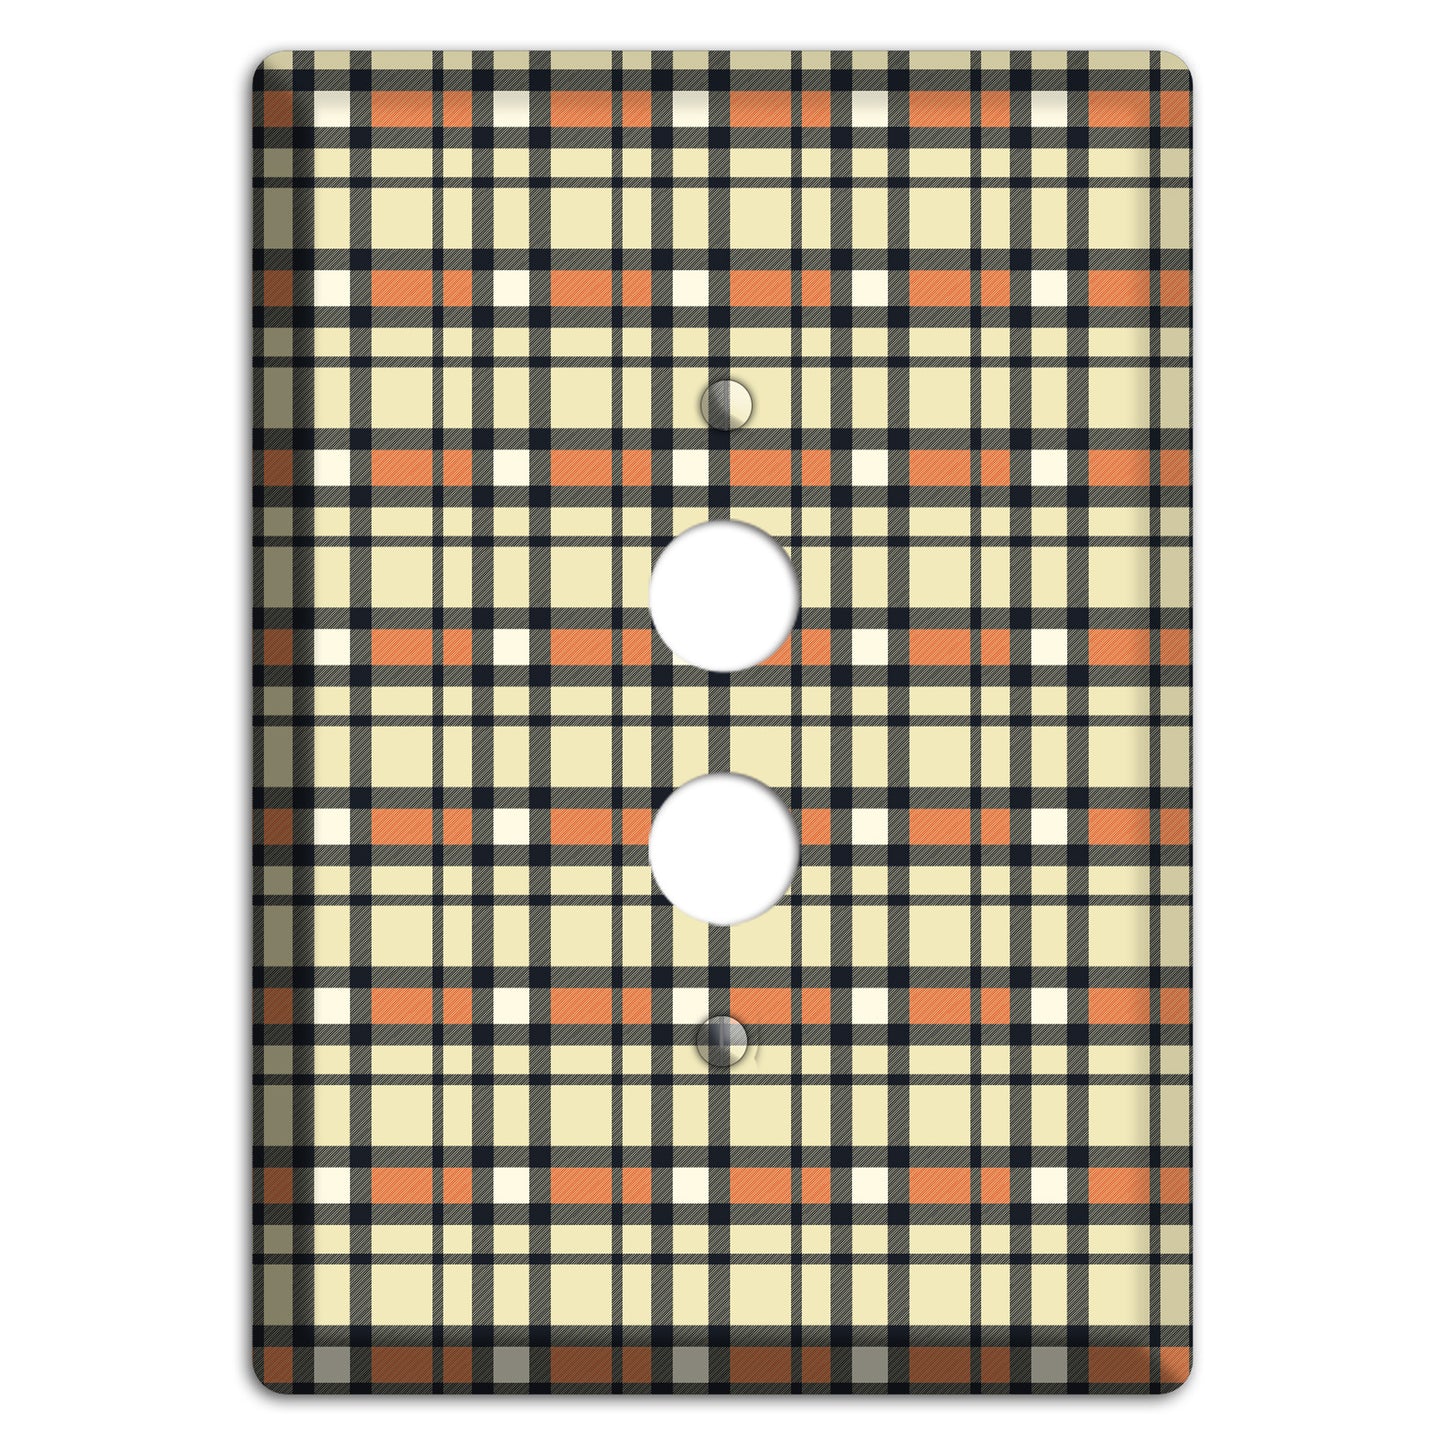 Beige and Brown Plaid 1 Pushbutton Wallplate